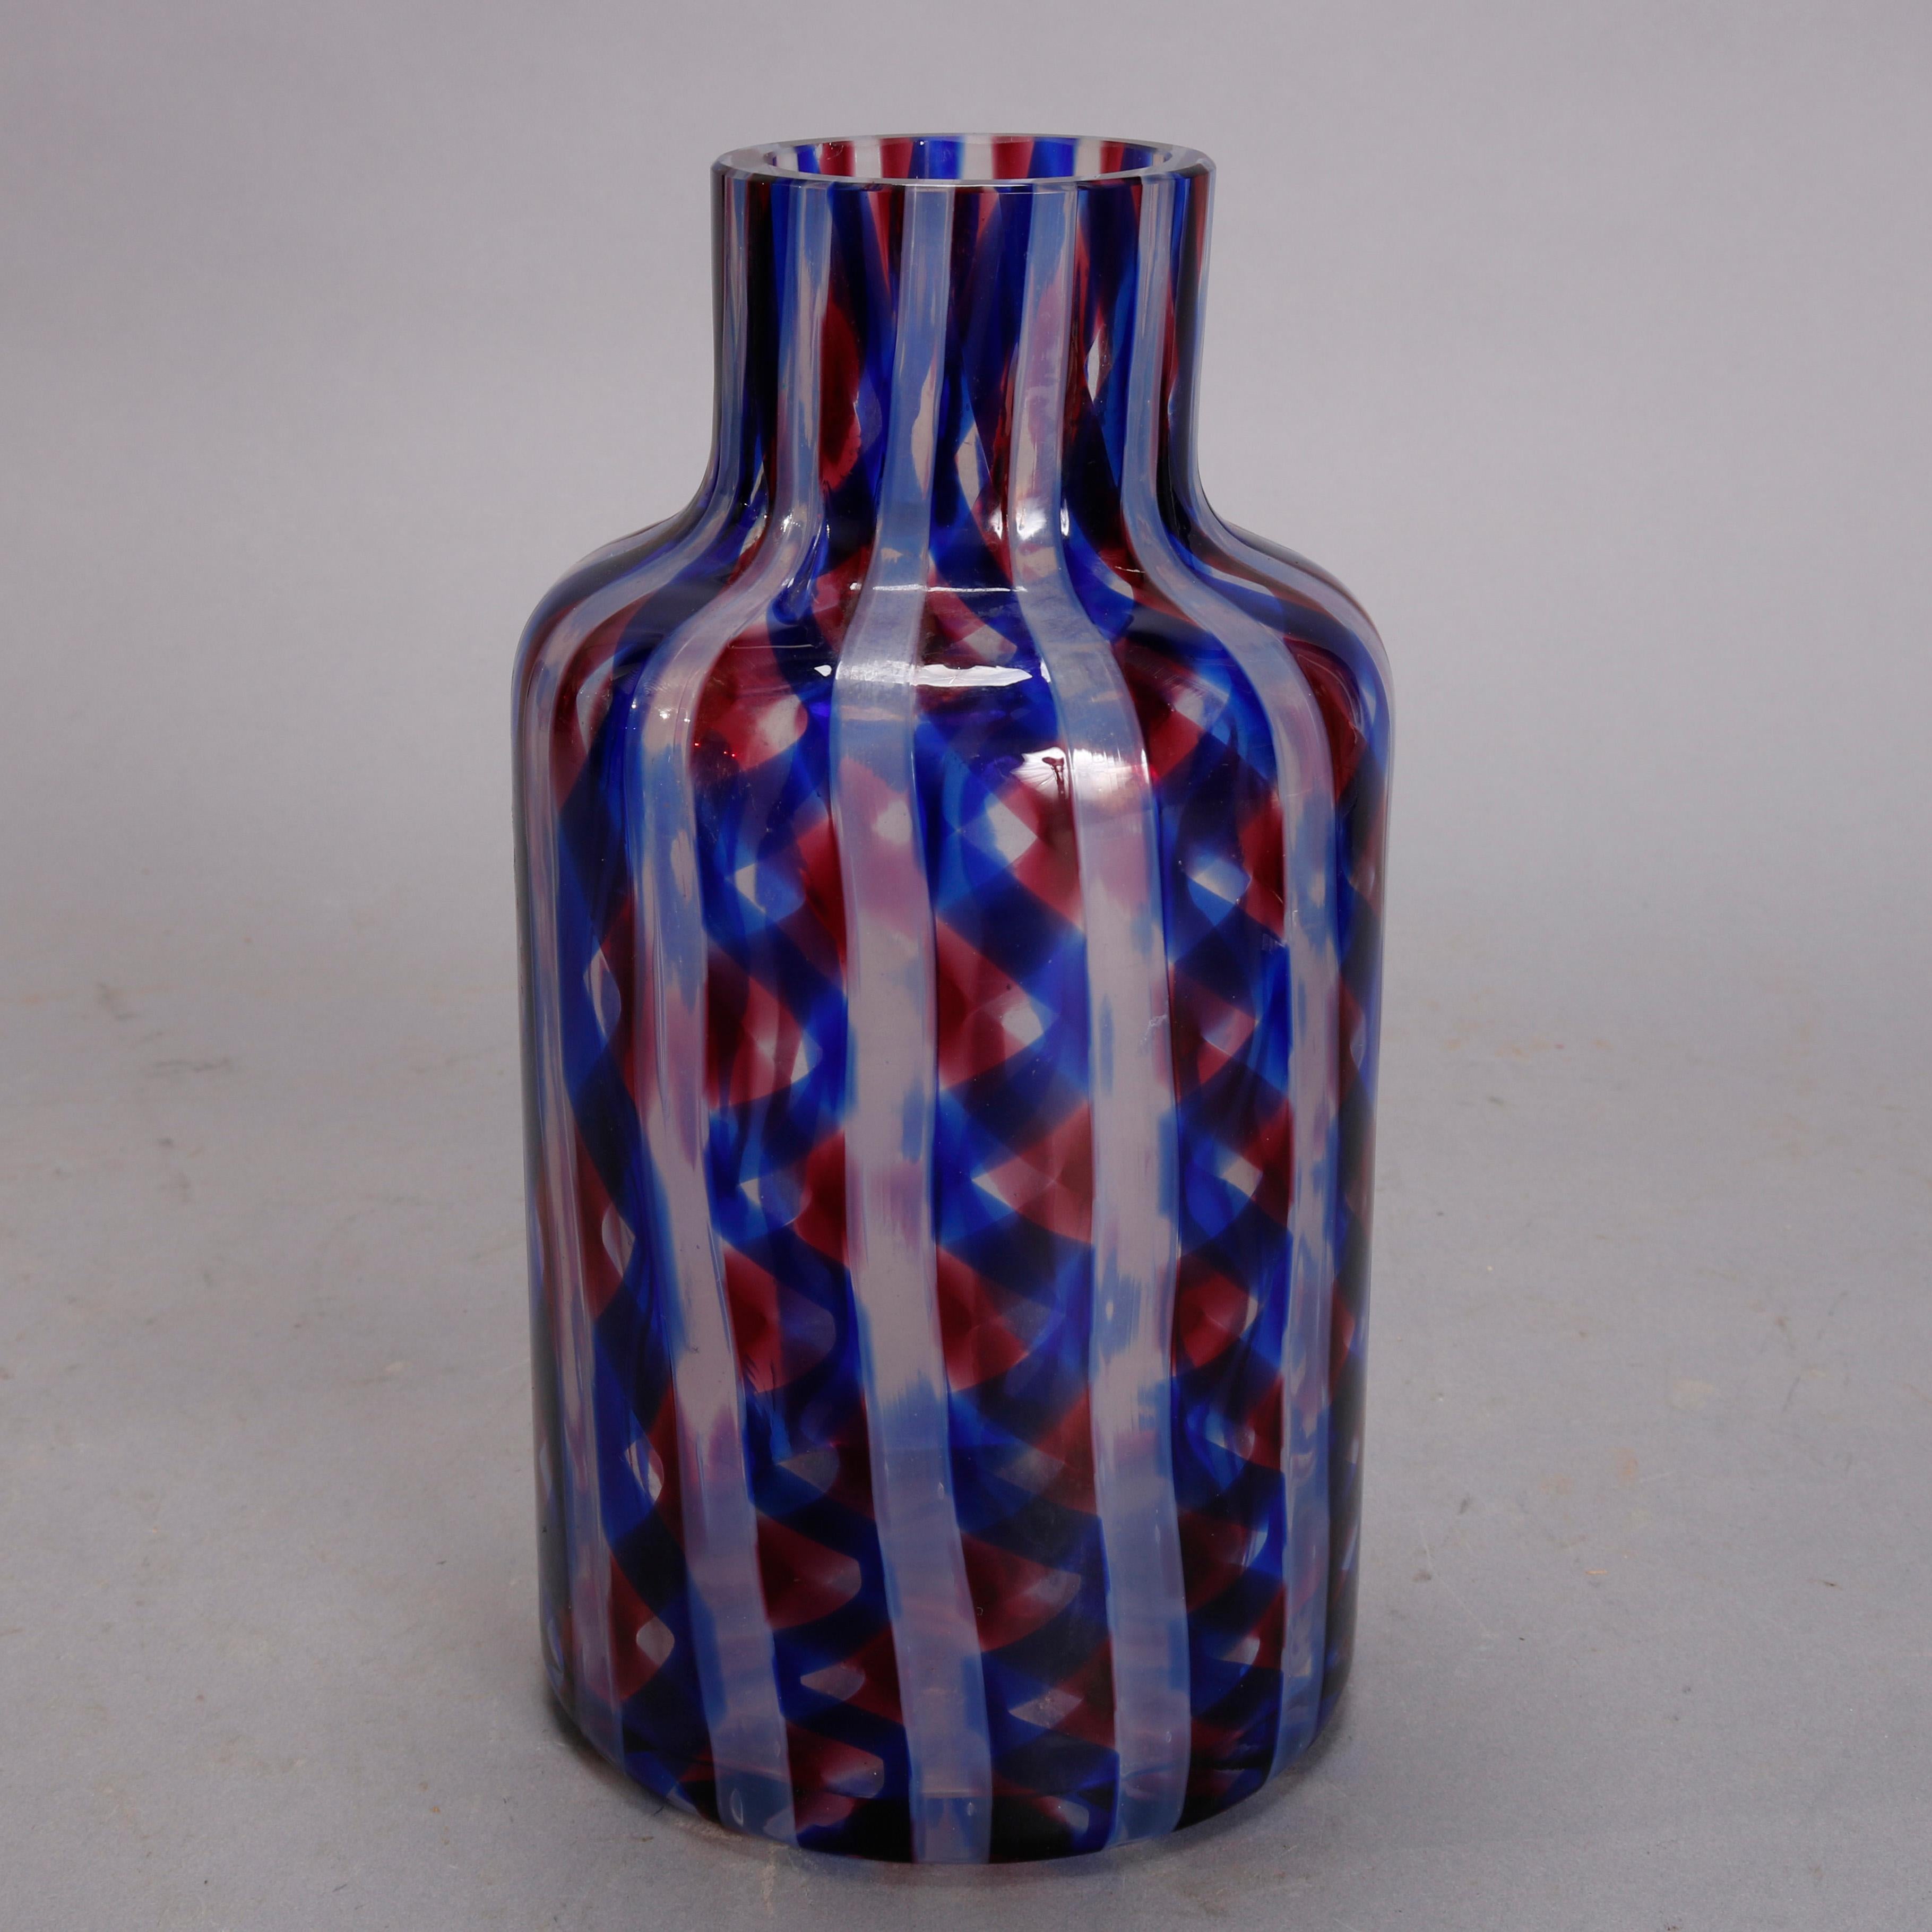 A Mid-Century Modern Italian Murano glass liquor decanter offers bottle form with swirled blue and red striping, 20th century

Measures: 11.5